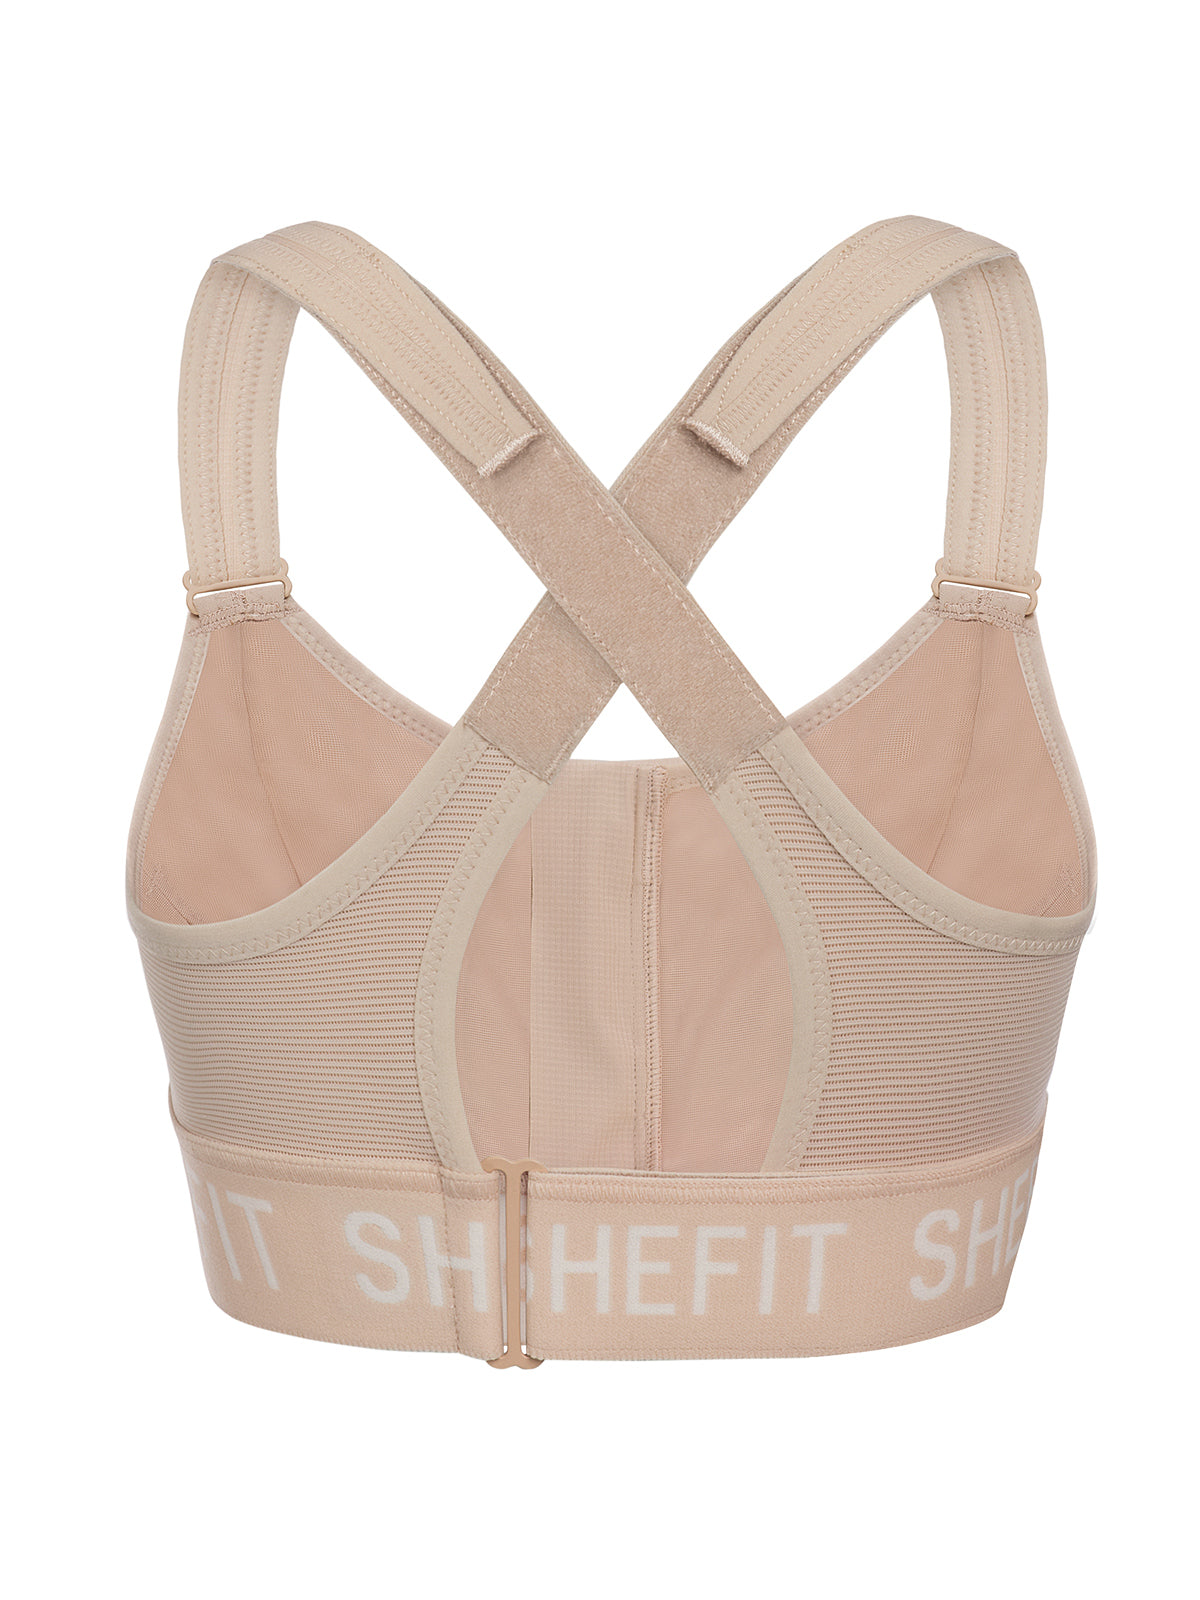 SHEFIT - How many women out there have to wear two or more sports bras?  🙋‍♀️ GURL STOP! There's a better way *cough, cough, SHEFIT* 👀